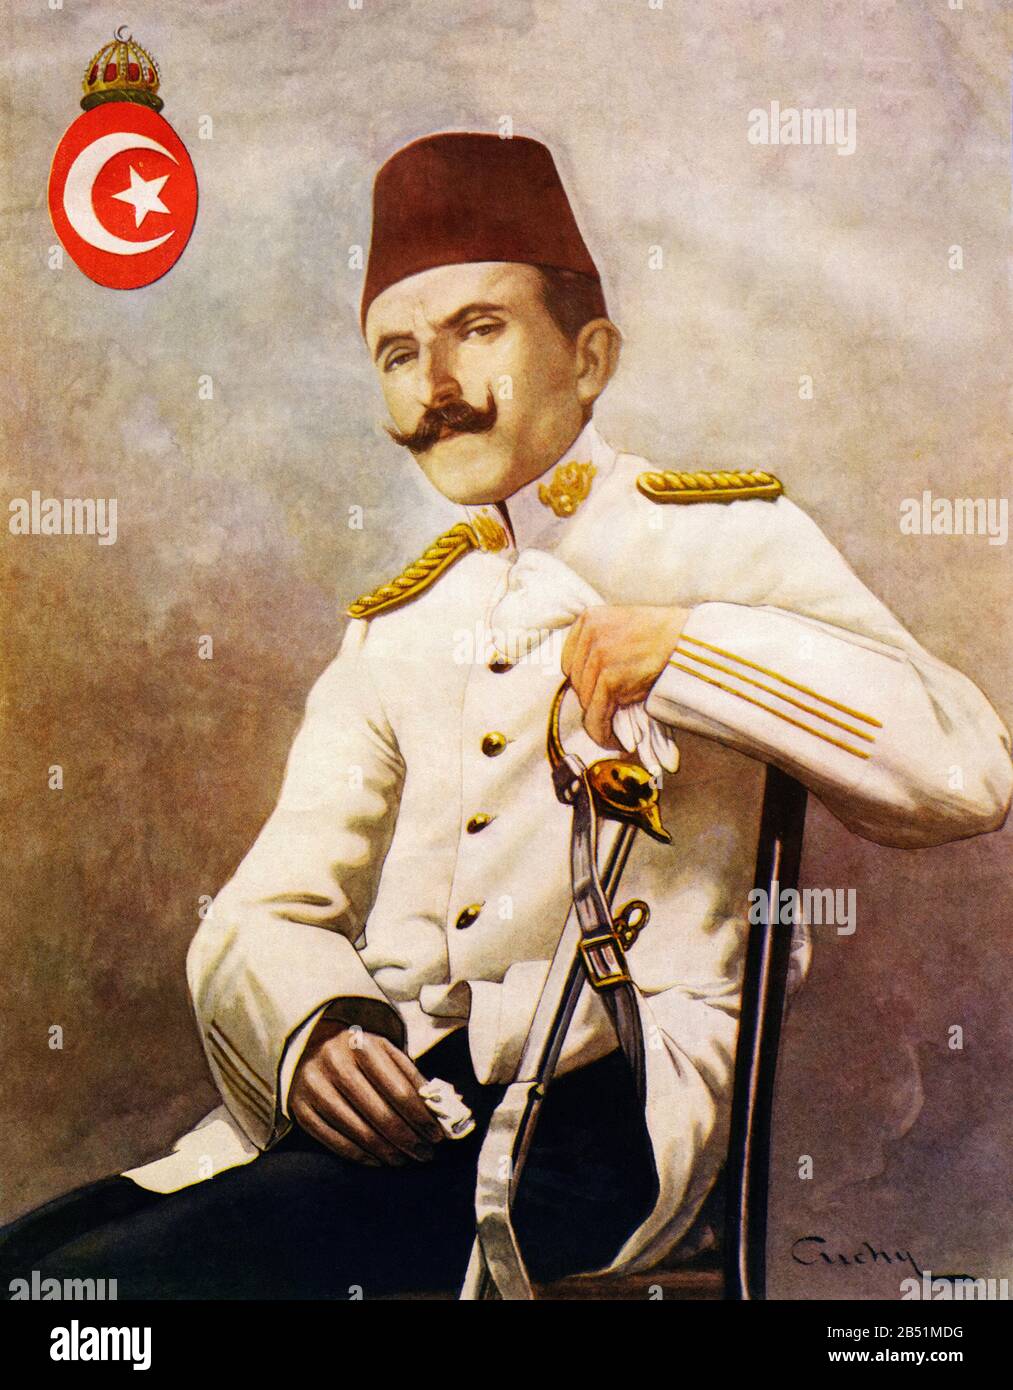 Color portrait of Ismail Enver (1881 - 1922), called Enver Pachá or Enver Bey, was an officer of the Ottoman Empire and leader of the Young Turks Revo Stock Photo